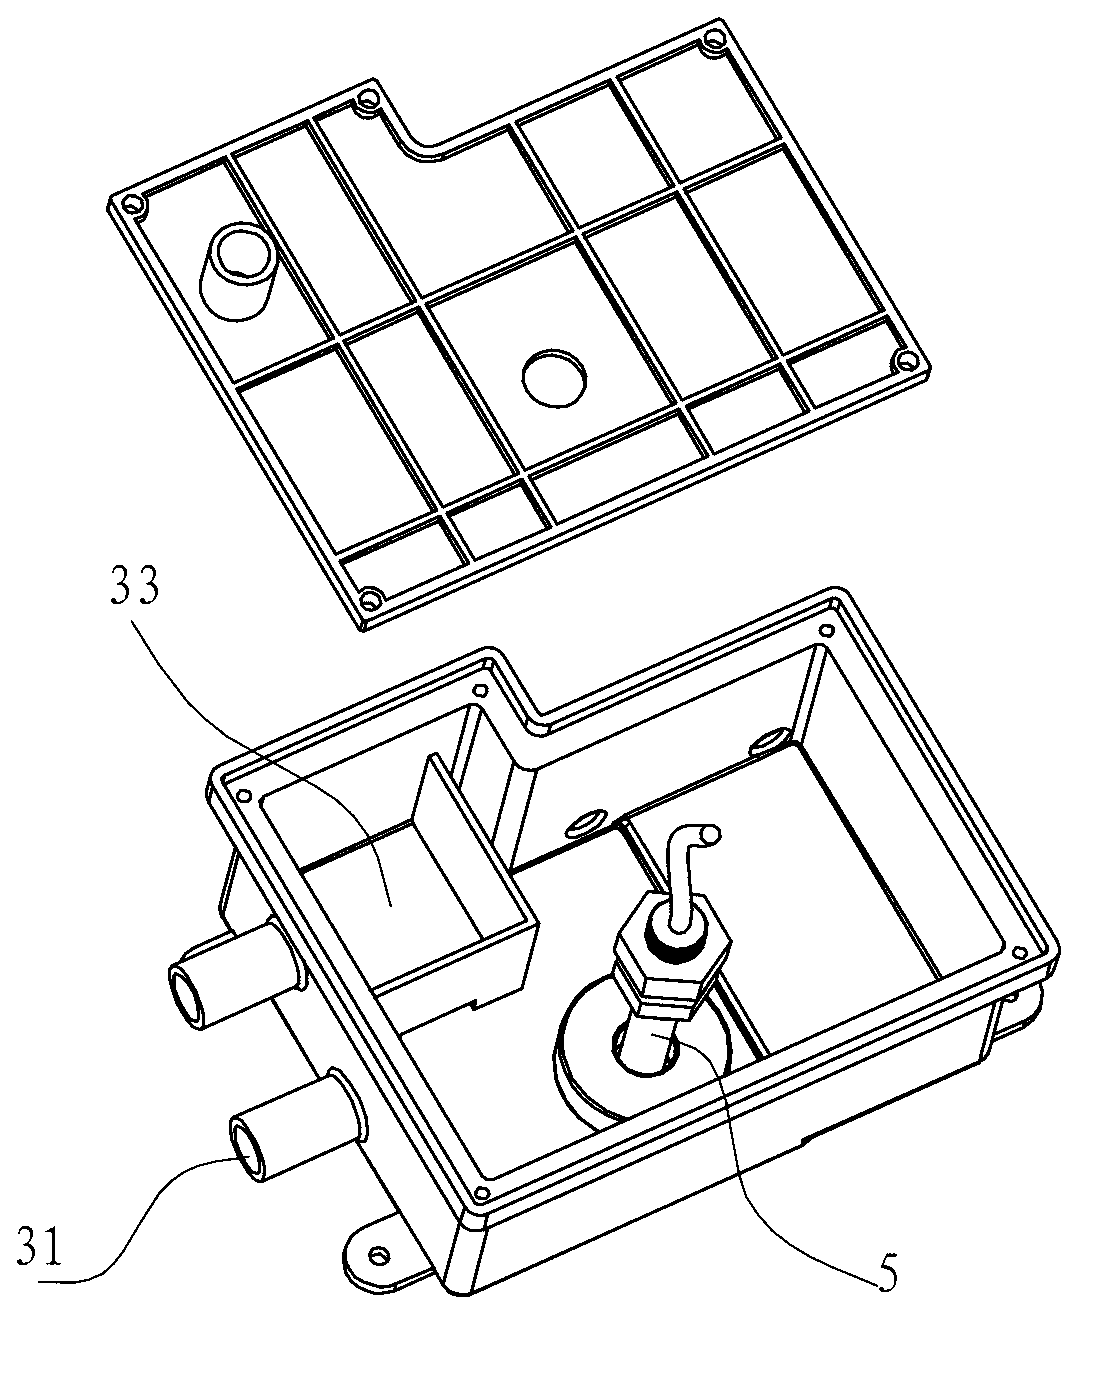 Steam-generating device used for electric steam box